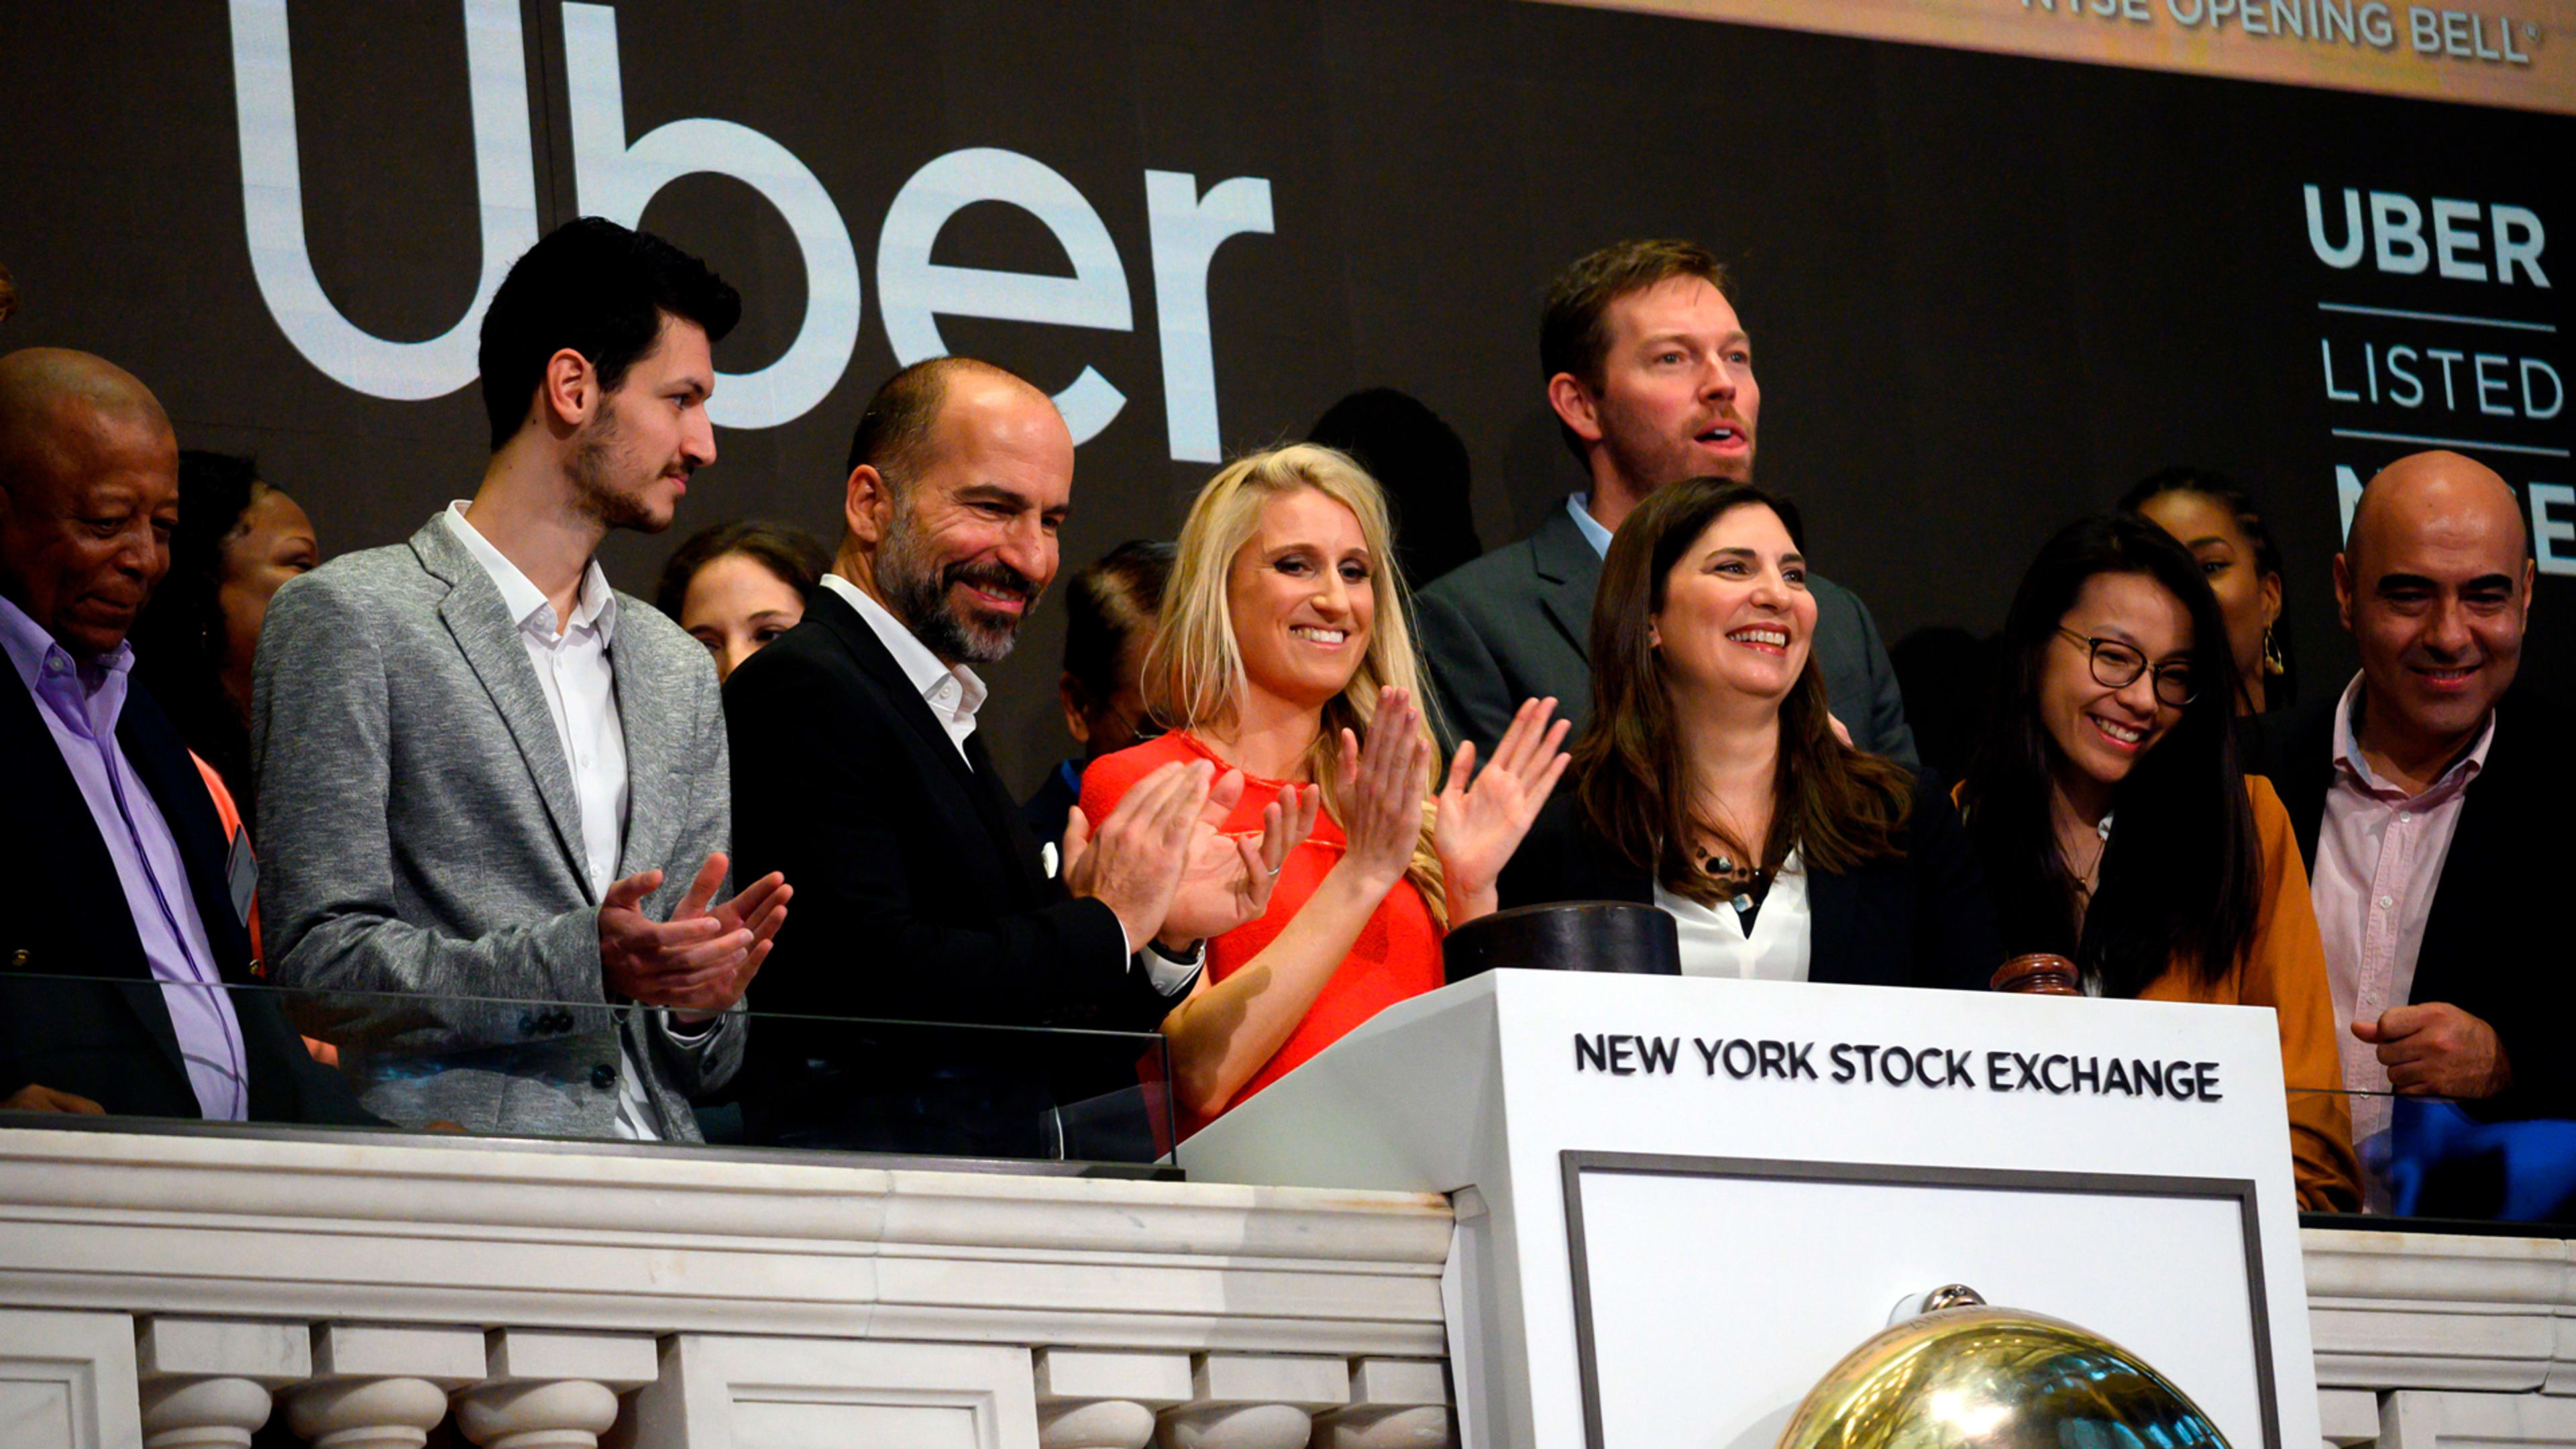 Uber went public, and a bunch of rich people got richer